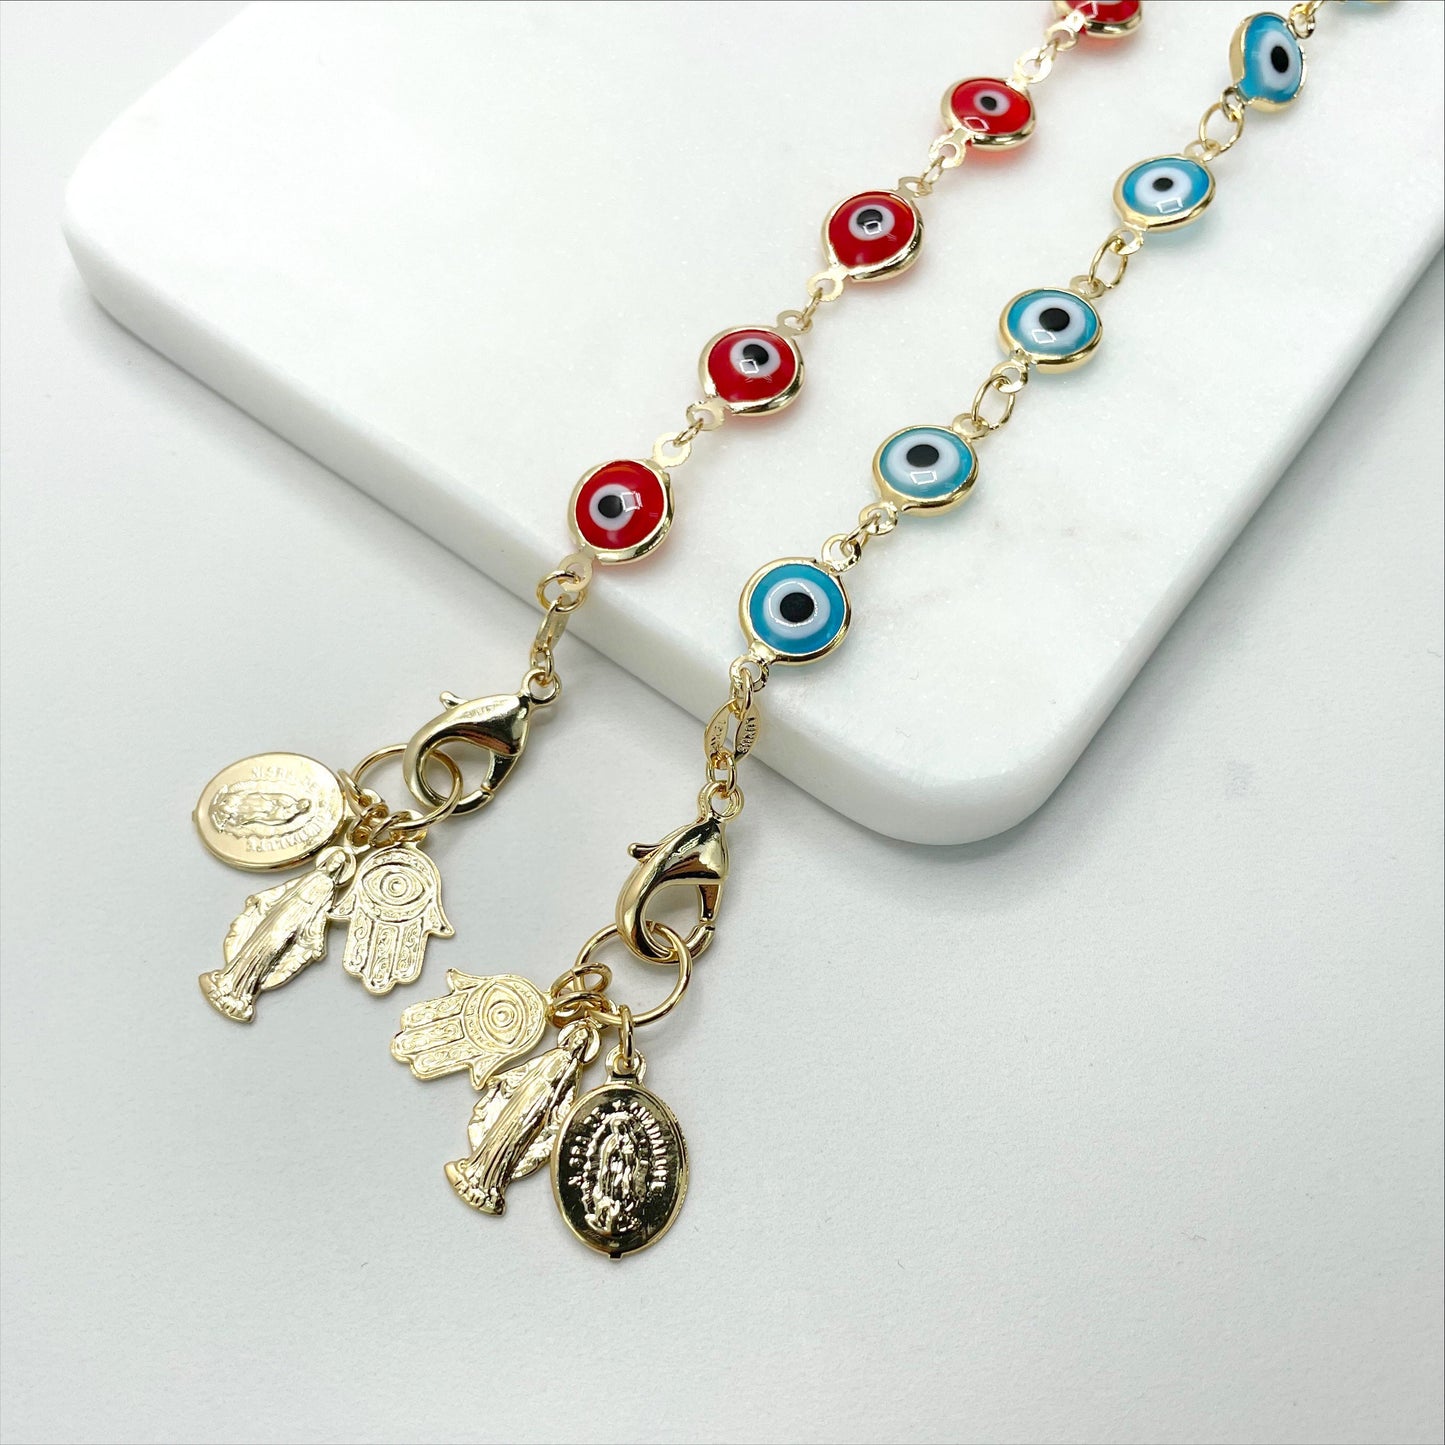 18k Gold Filled Red or Blue Evil Eyes Linked with Hamsa Hand, La Milagrosa, Virgen Guadalupe Charms Wholesale Jewelry Making Supplies